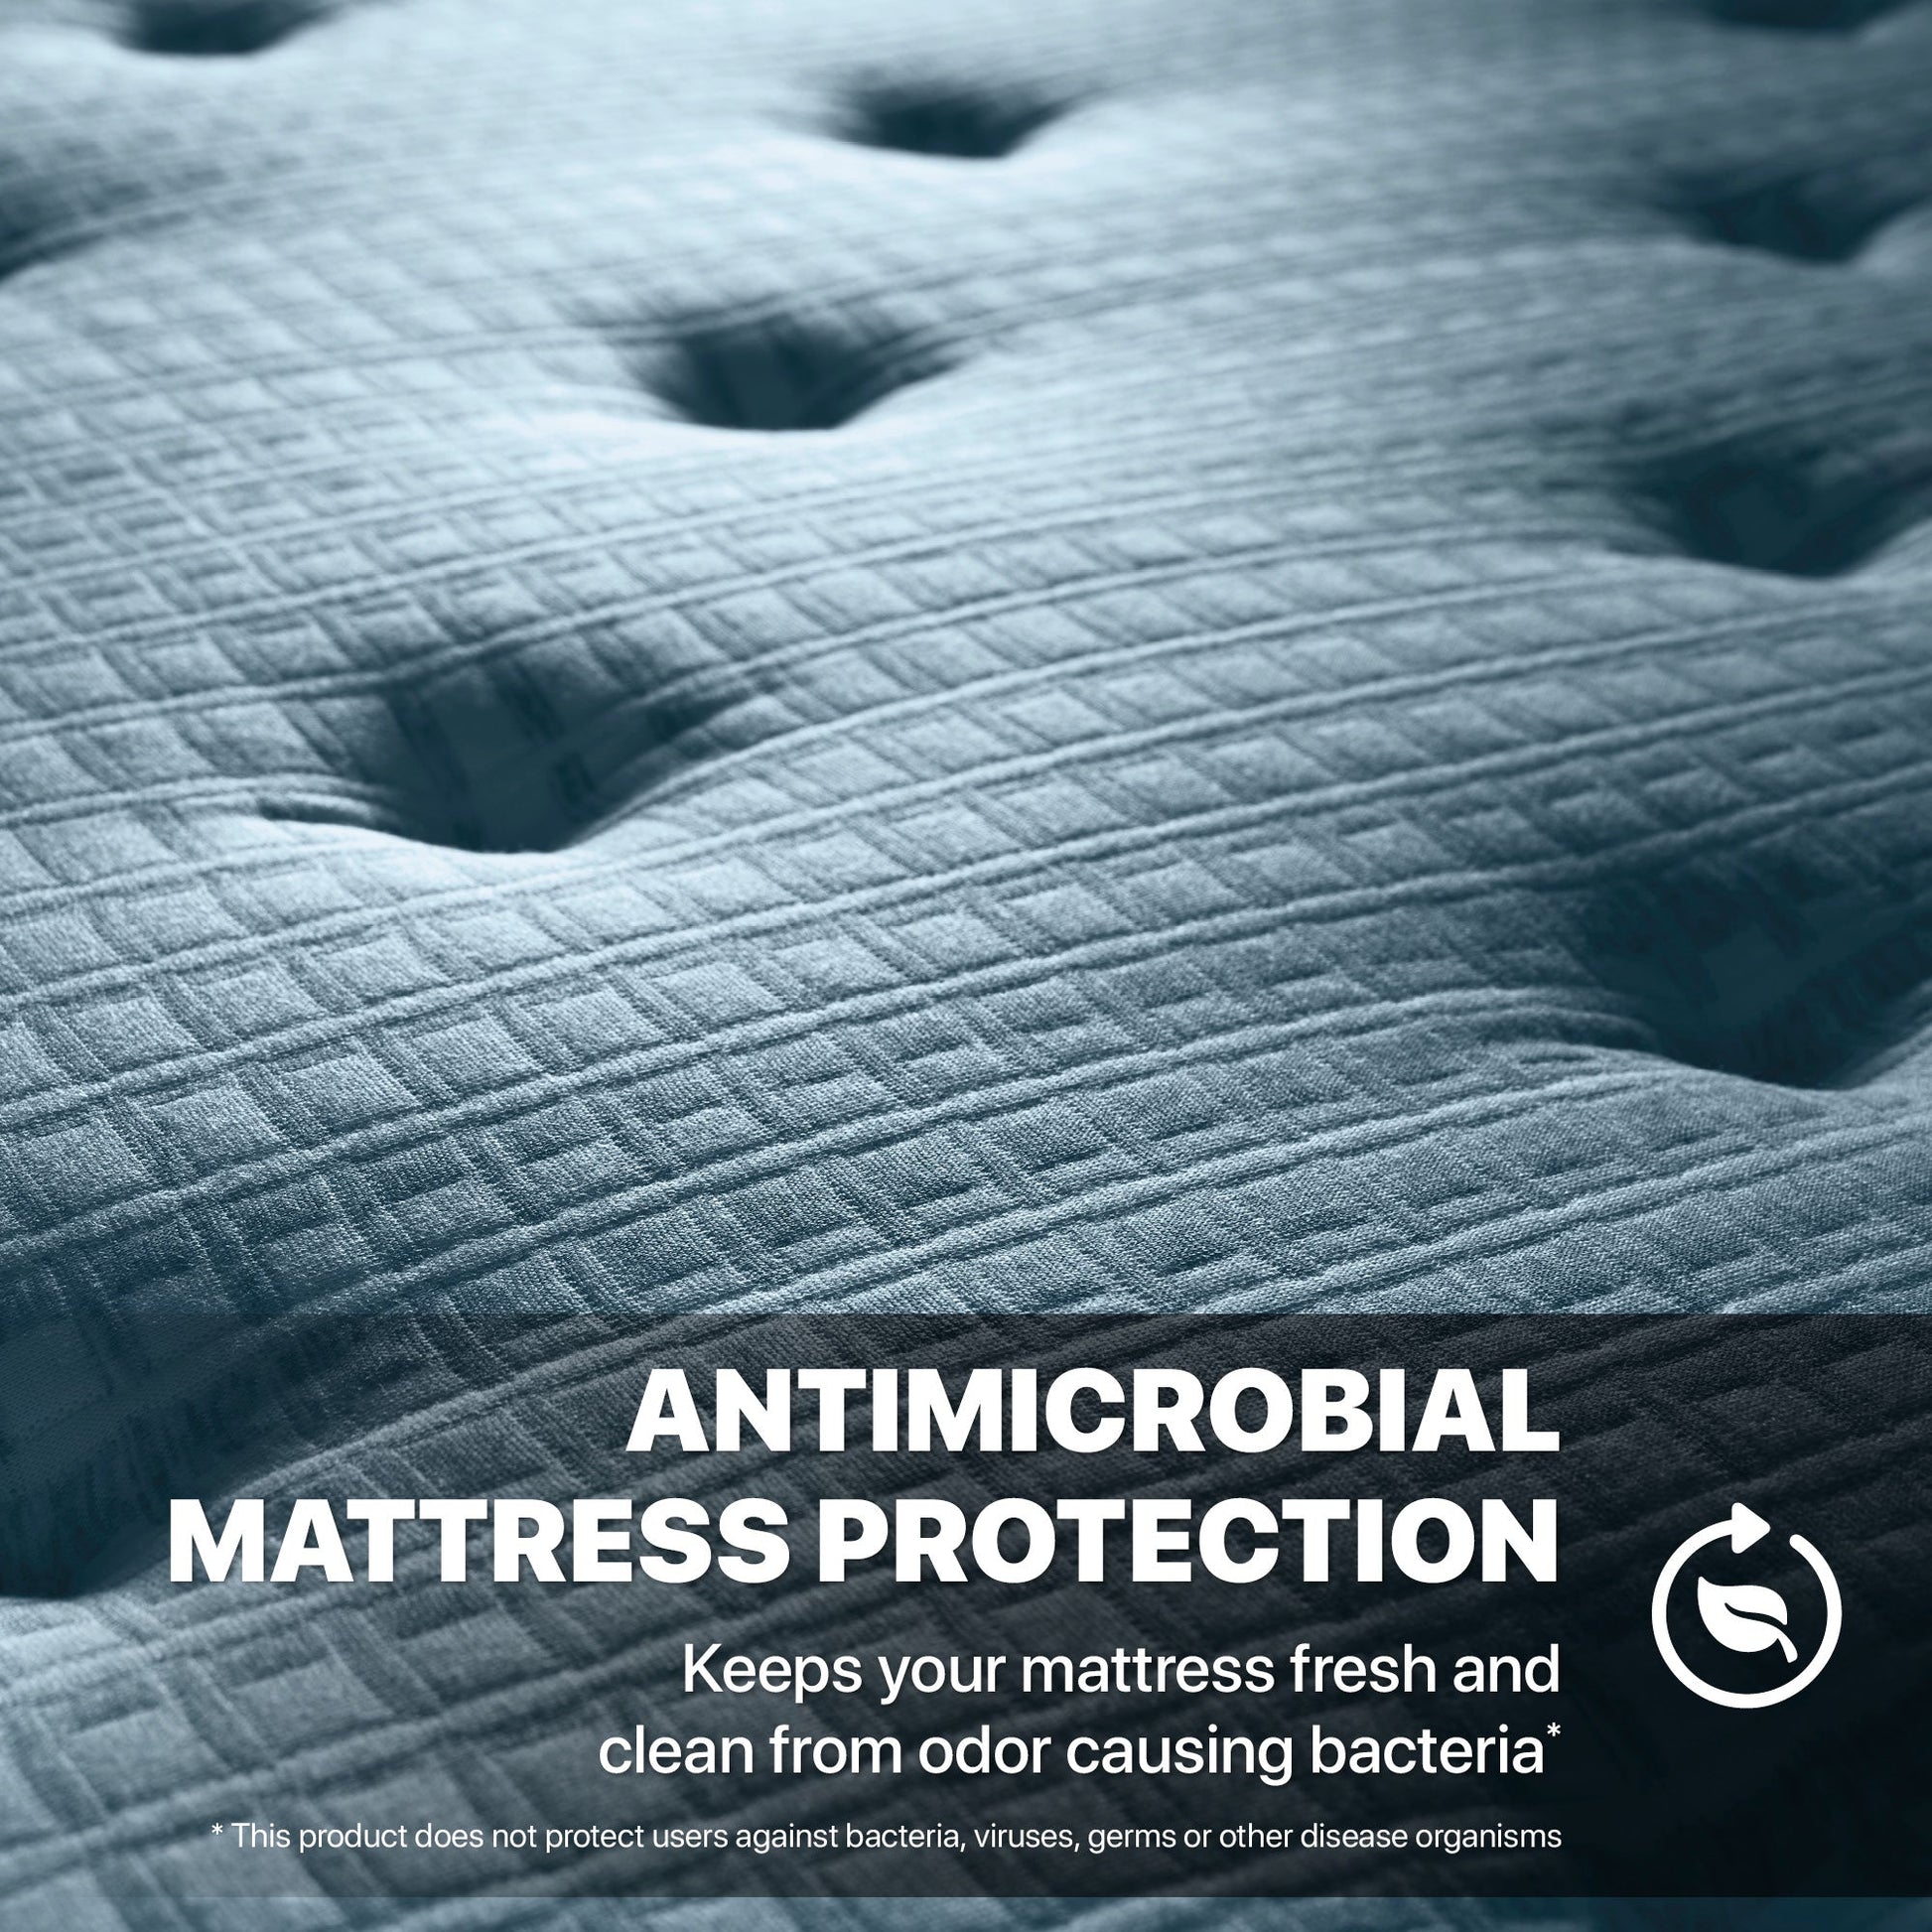 Beautyrest Silver® BRS900 Medium Firm Mattress Antimicrobial Protection